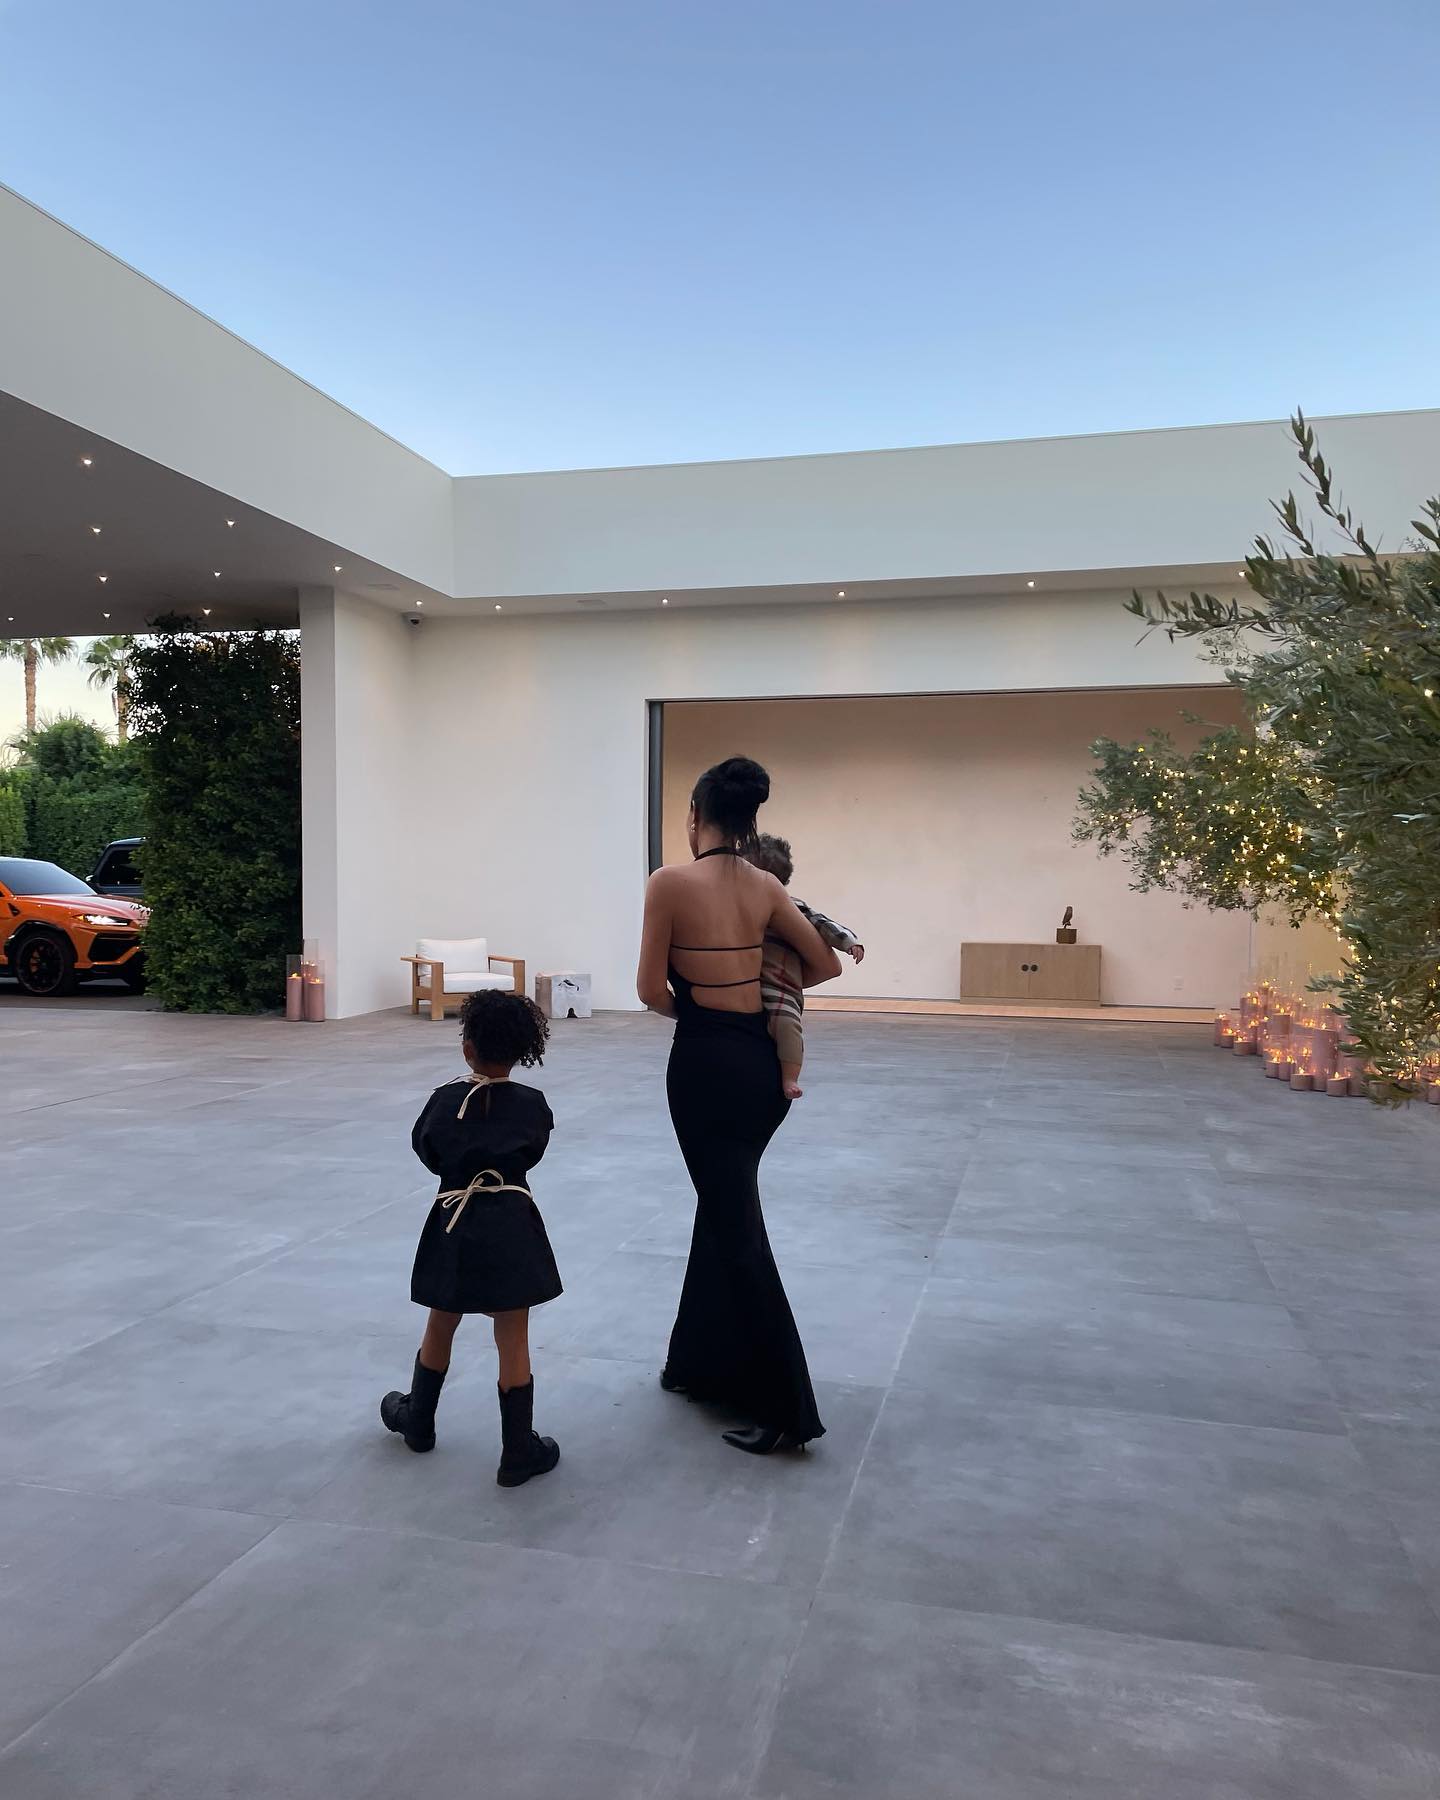 Kylie Jenner goes chic in champagne as she poses for snap with Stormi